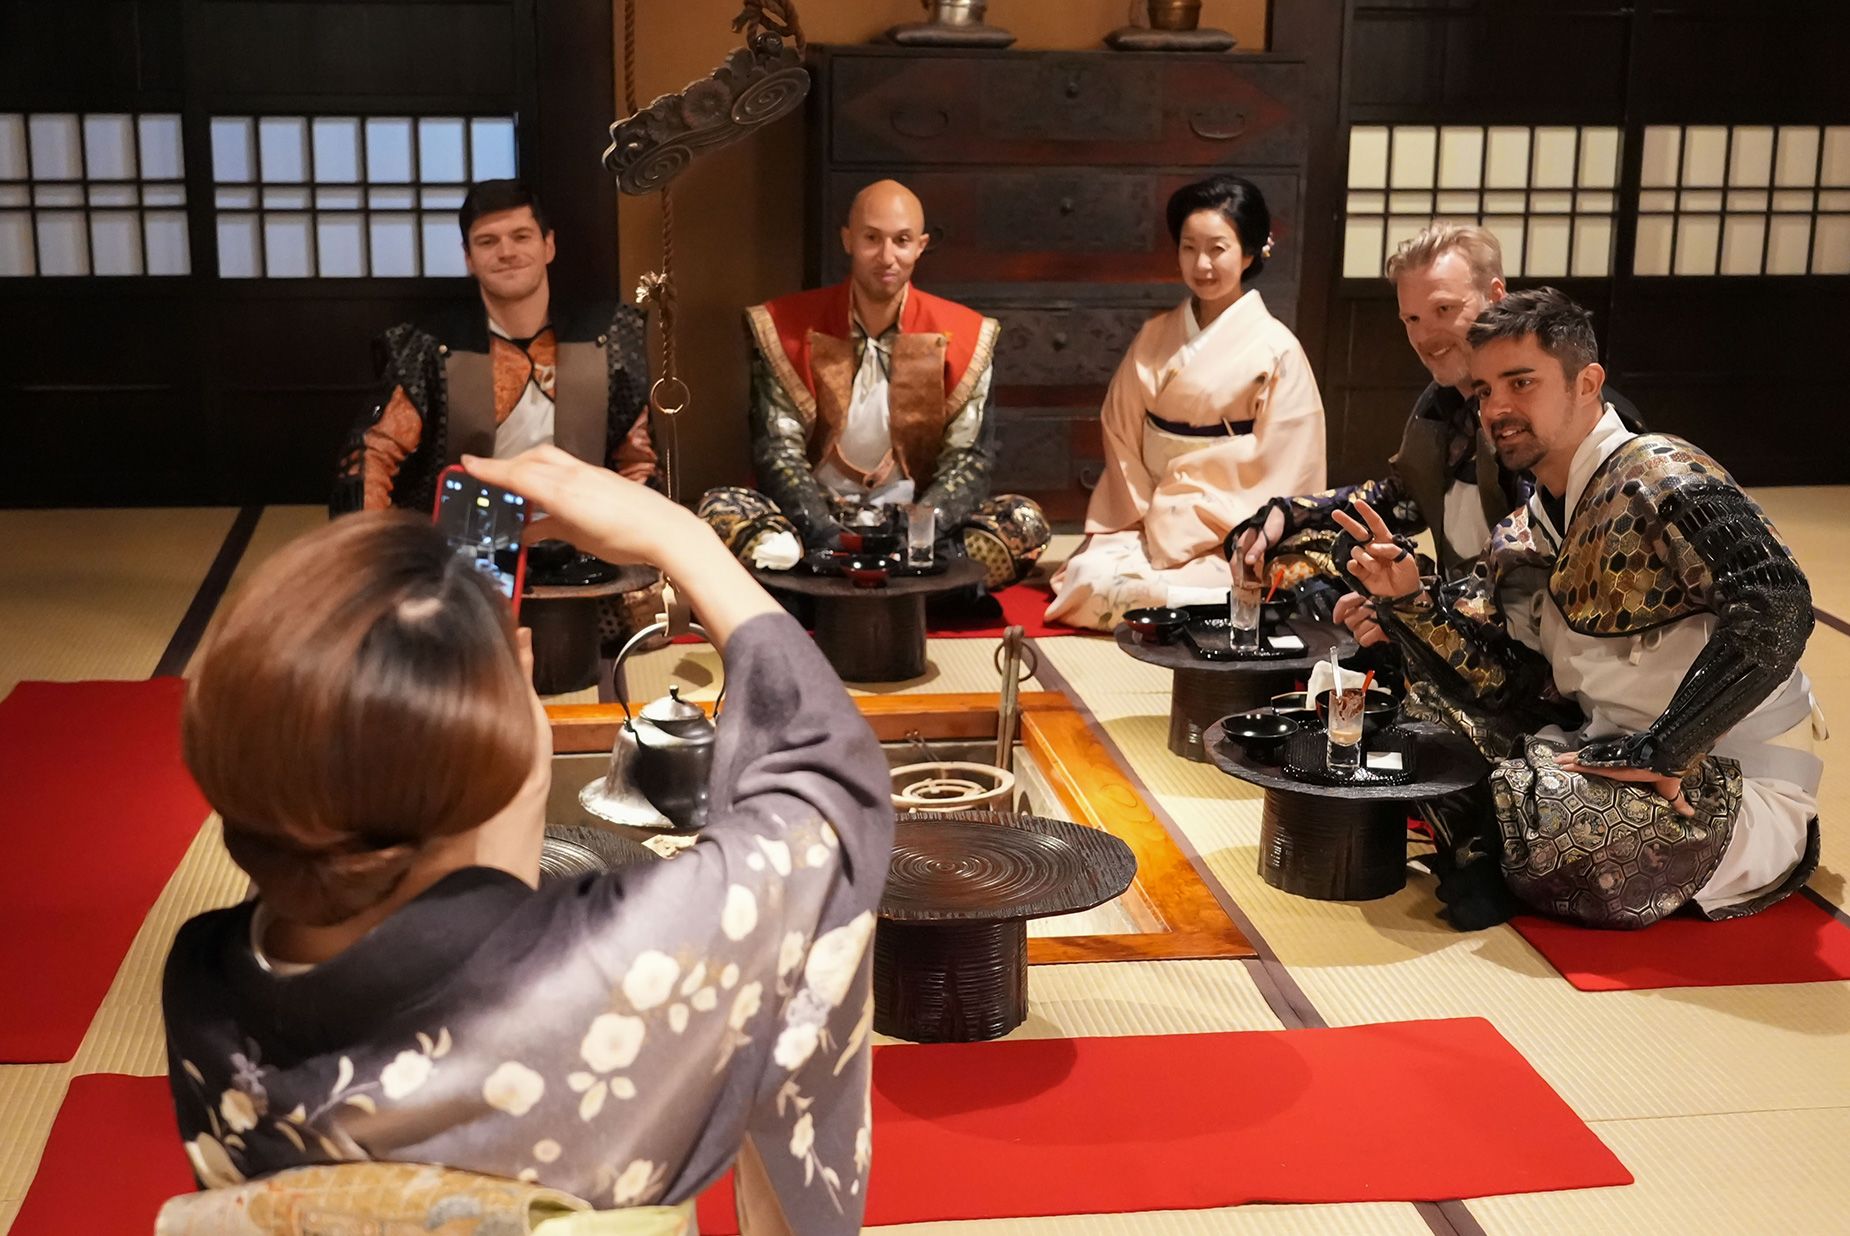 Visitors can enjoy a traditional kaiseki meal before spending the night inside the castle.